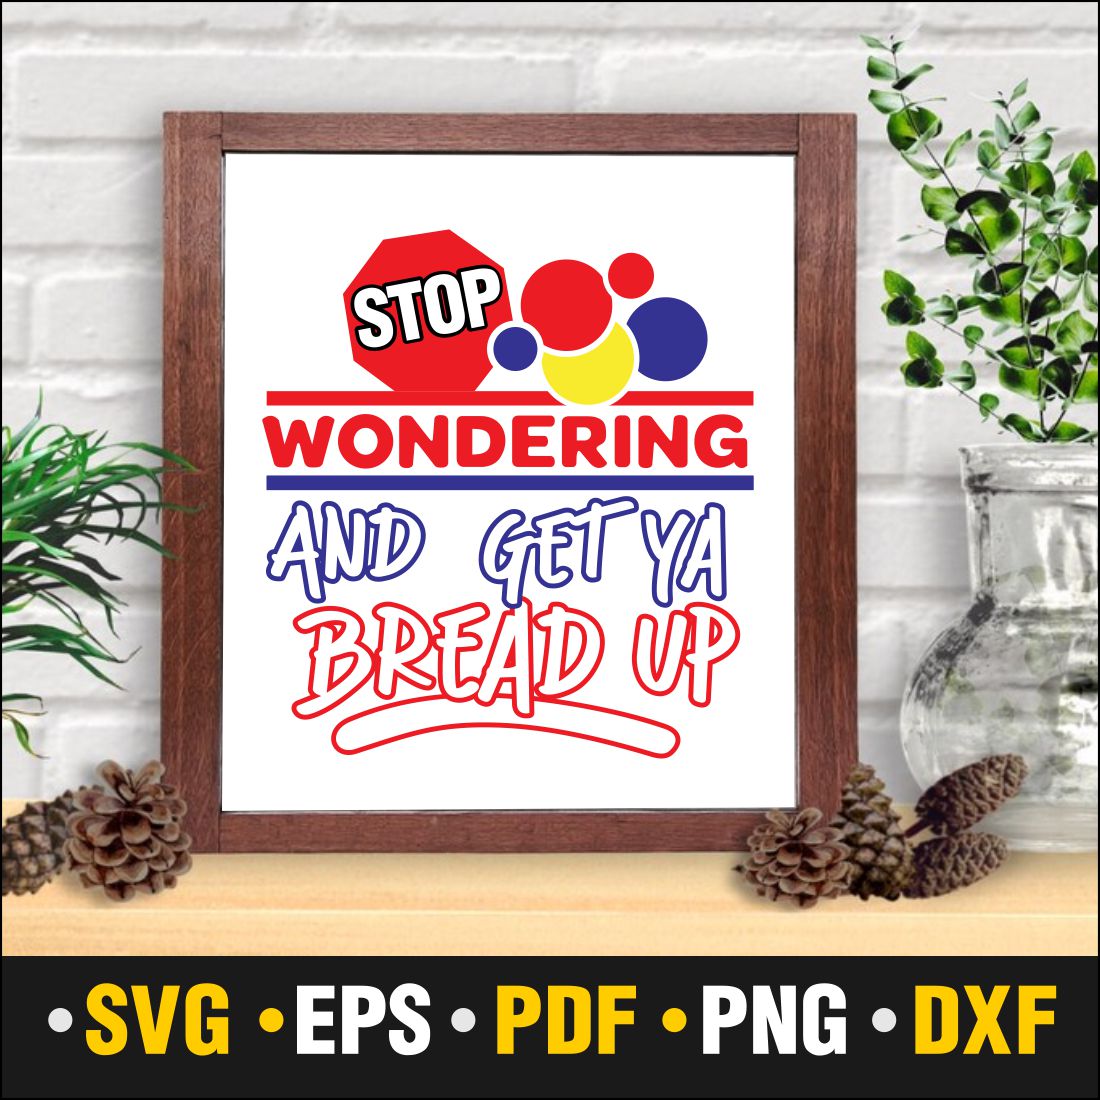 Stop Wondering and Get Ya Bread Up Svg, Stop Wondering and Get Ya Bread Up Frame Svg Vector Cut file Cricut, Silhouette, Pdf Png, Dxf, Decal, Sticker, Stencil, Vinyl preview image.